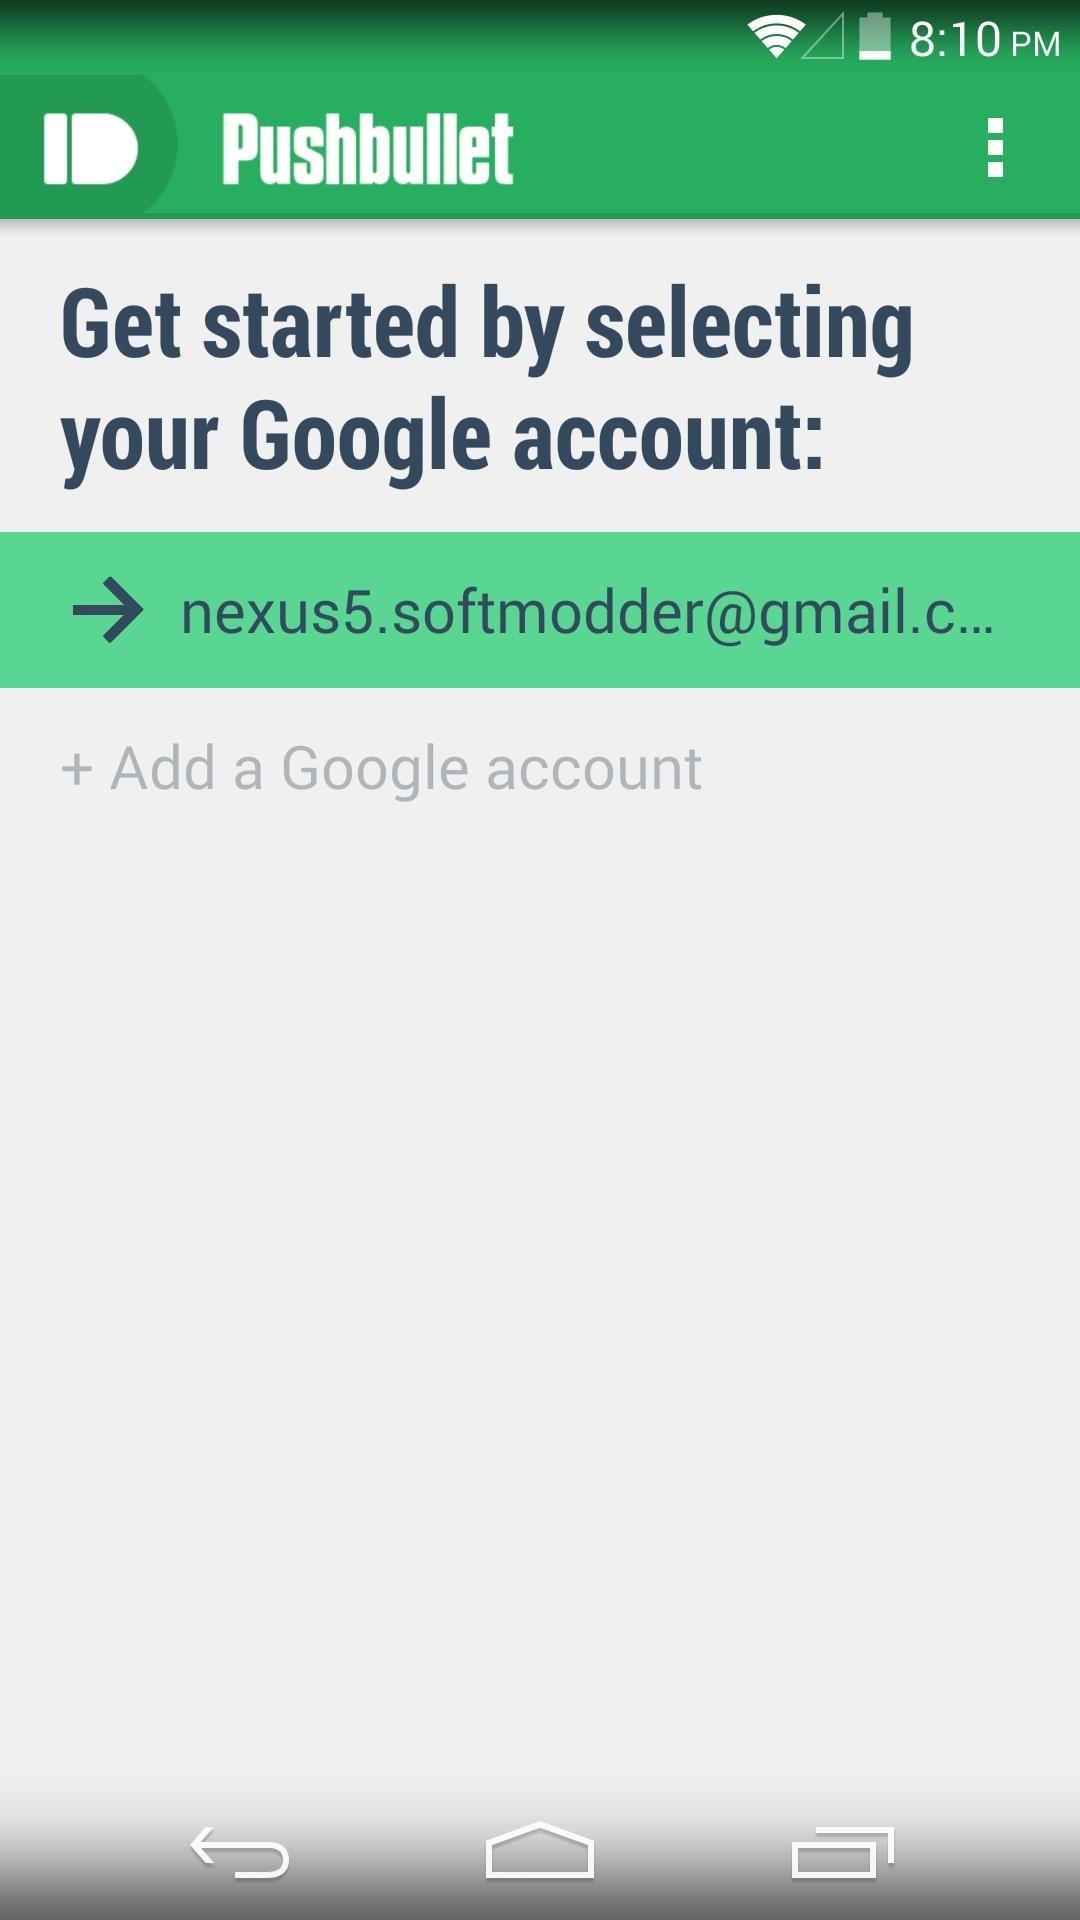 How to Get Custom Notifications on Your Nexus 5 for Just About Anything